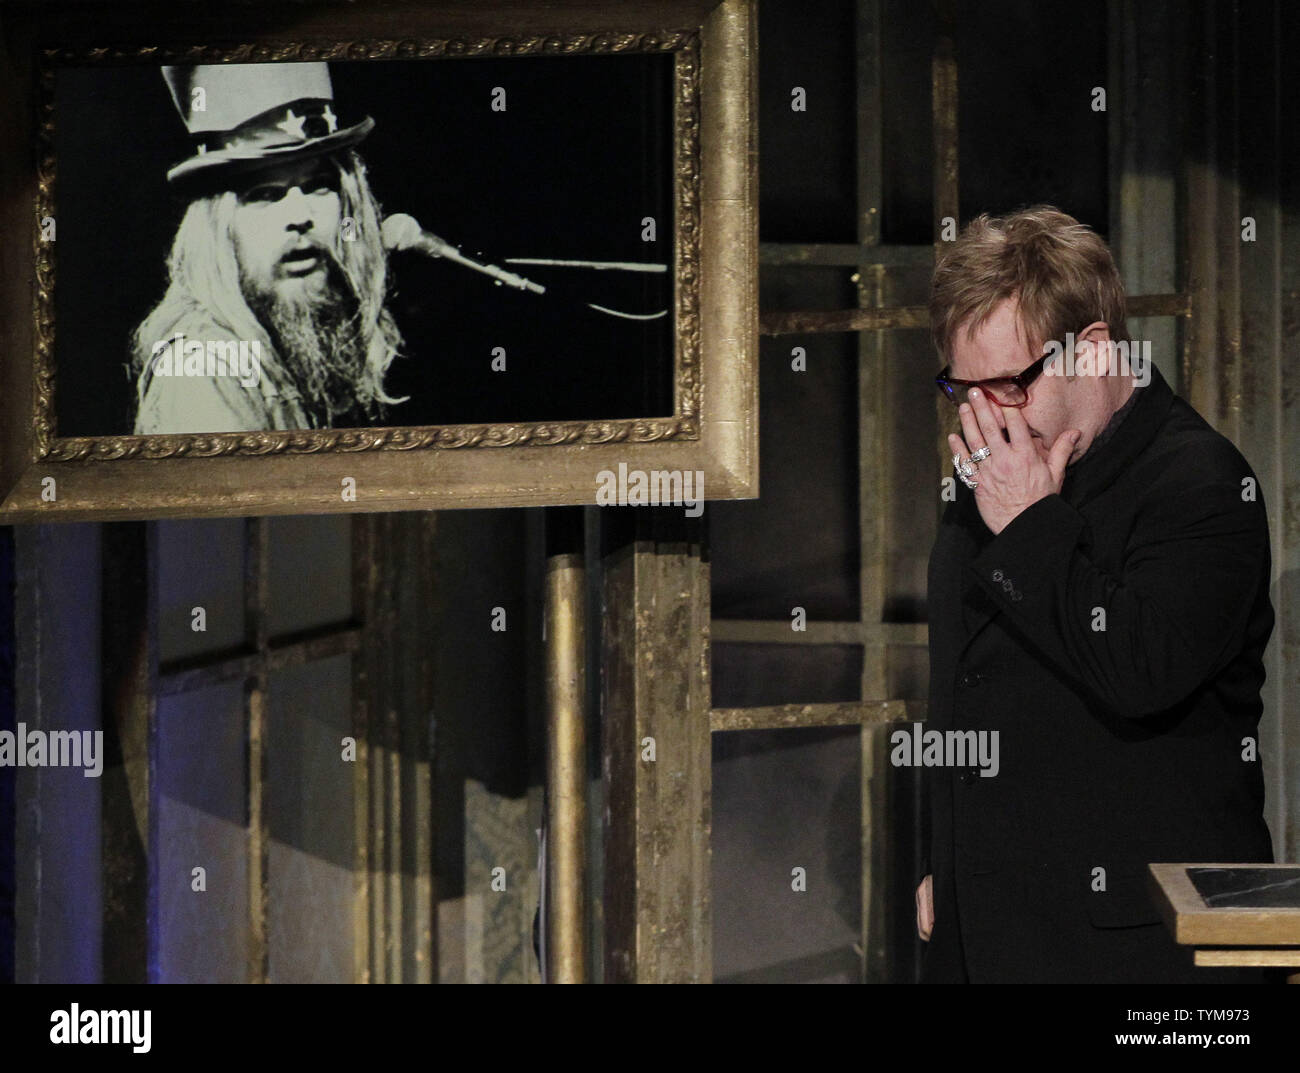 Elton John gets emotional as Leon Russell gets inducted into the Rock and Roll Hall of Fame at the Waldorf Astoria in New York City on March 14, 2011.  UPI/John Angelillo Stock Photo